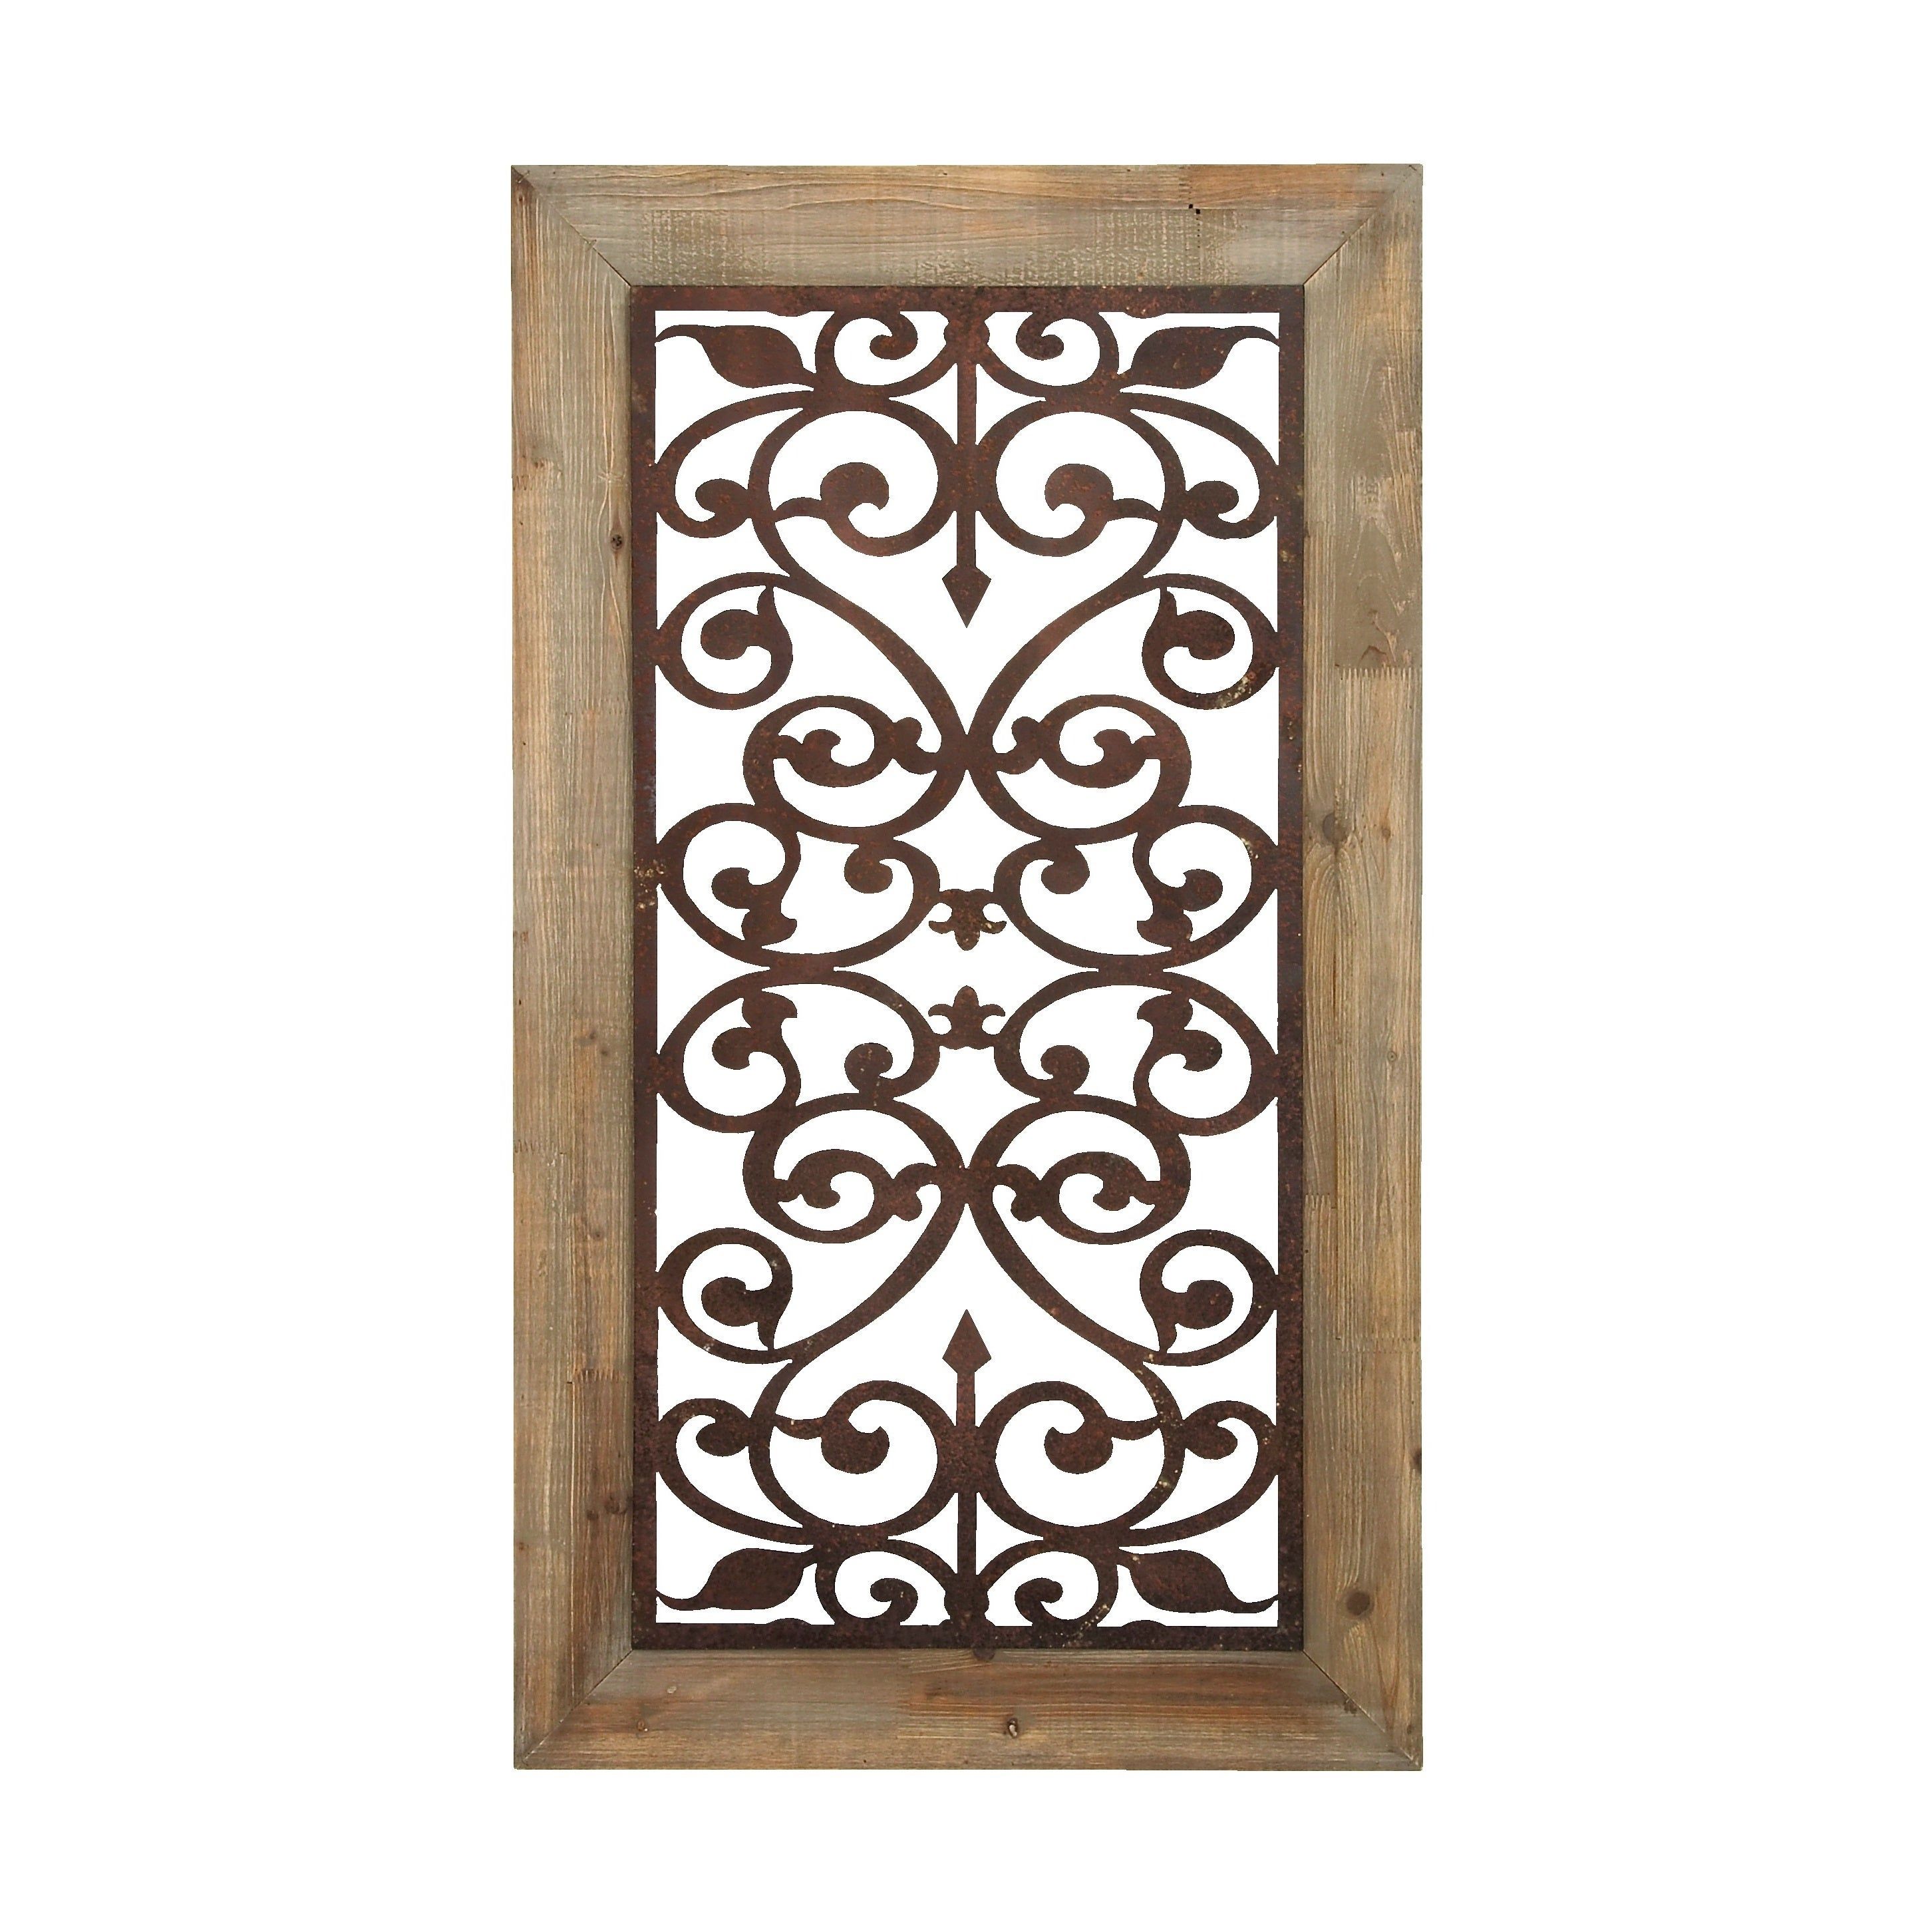 26" X 46" Distressed Wood & Brown Metal Wall Art Panel W/ Scroll Design Studio 35 | Overstock Shopping – The Best Deals On Wood Wall Art Intended For Ornamental Wood And Metal Scroll Wall Decor (View 4 of 30)